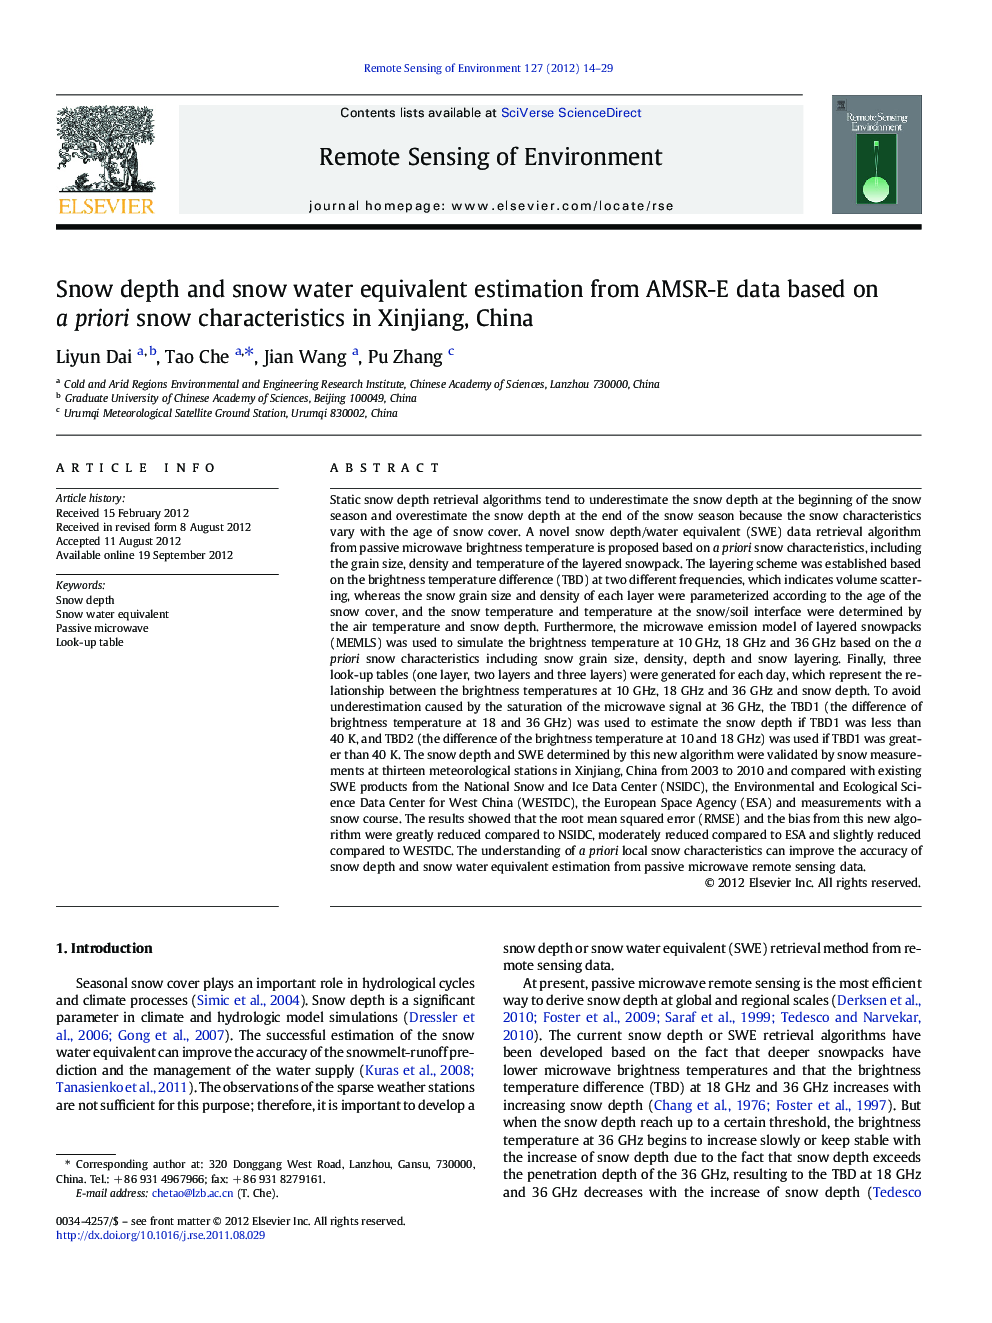 Snow depth and snow water equivalent estimation from AMSR-E data based on a priori snow characteristics in Xinjiang, China